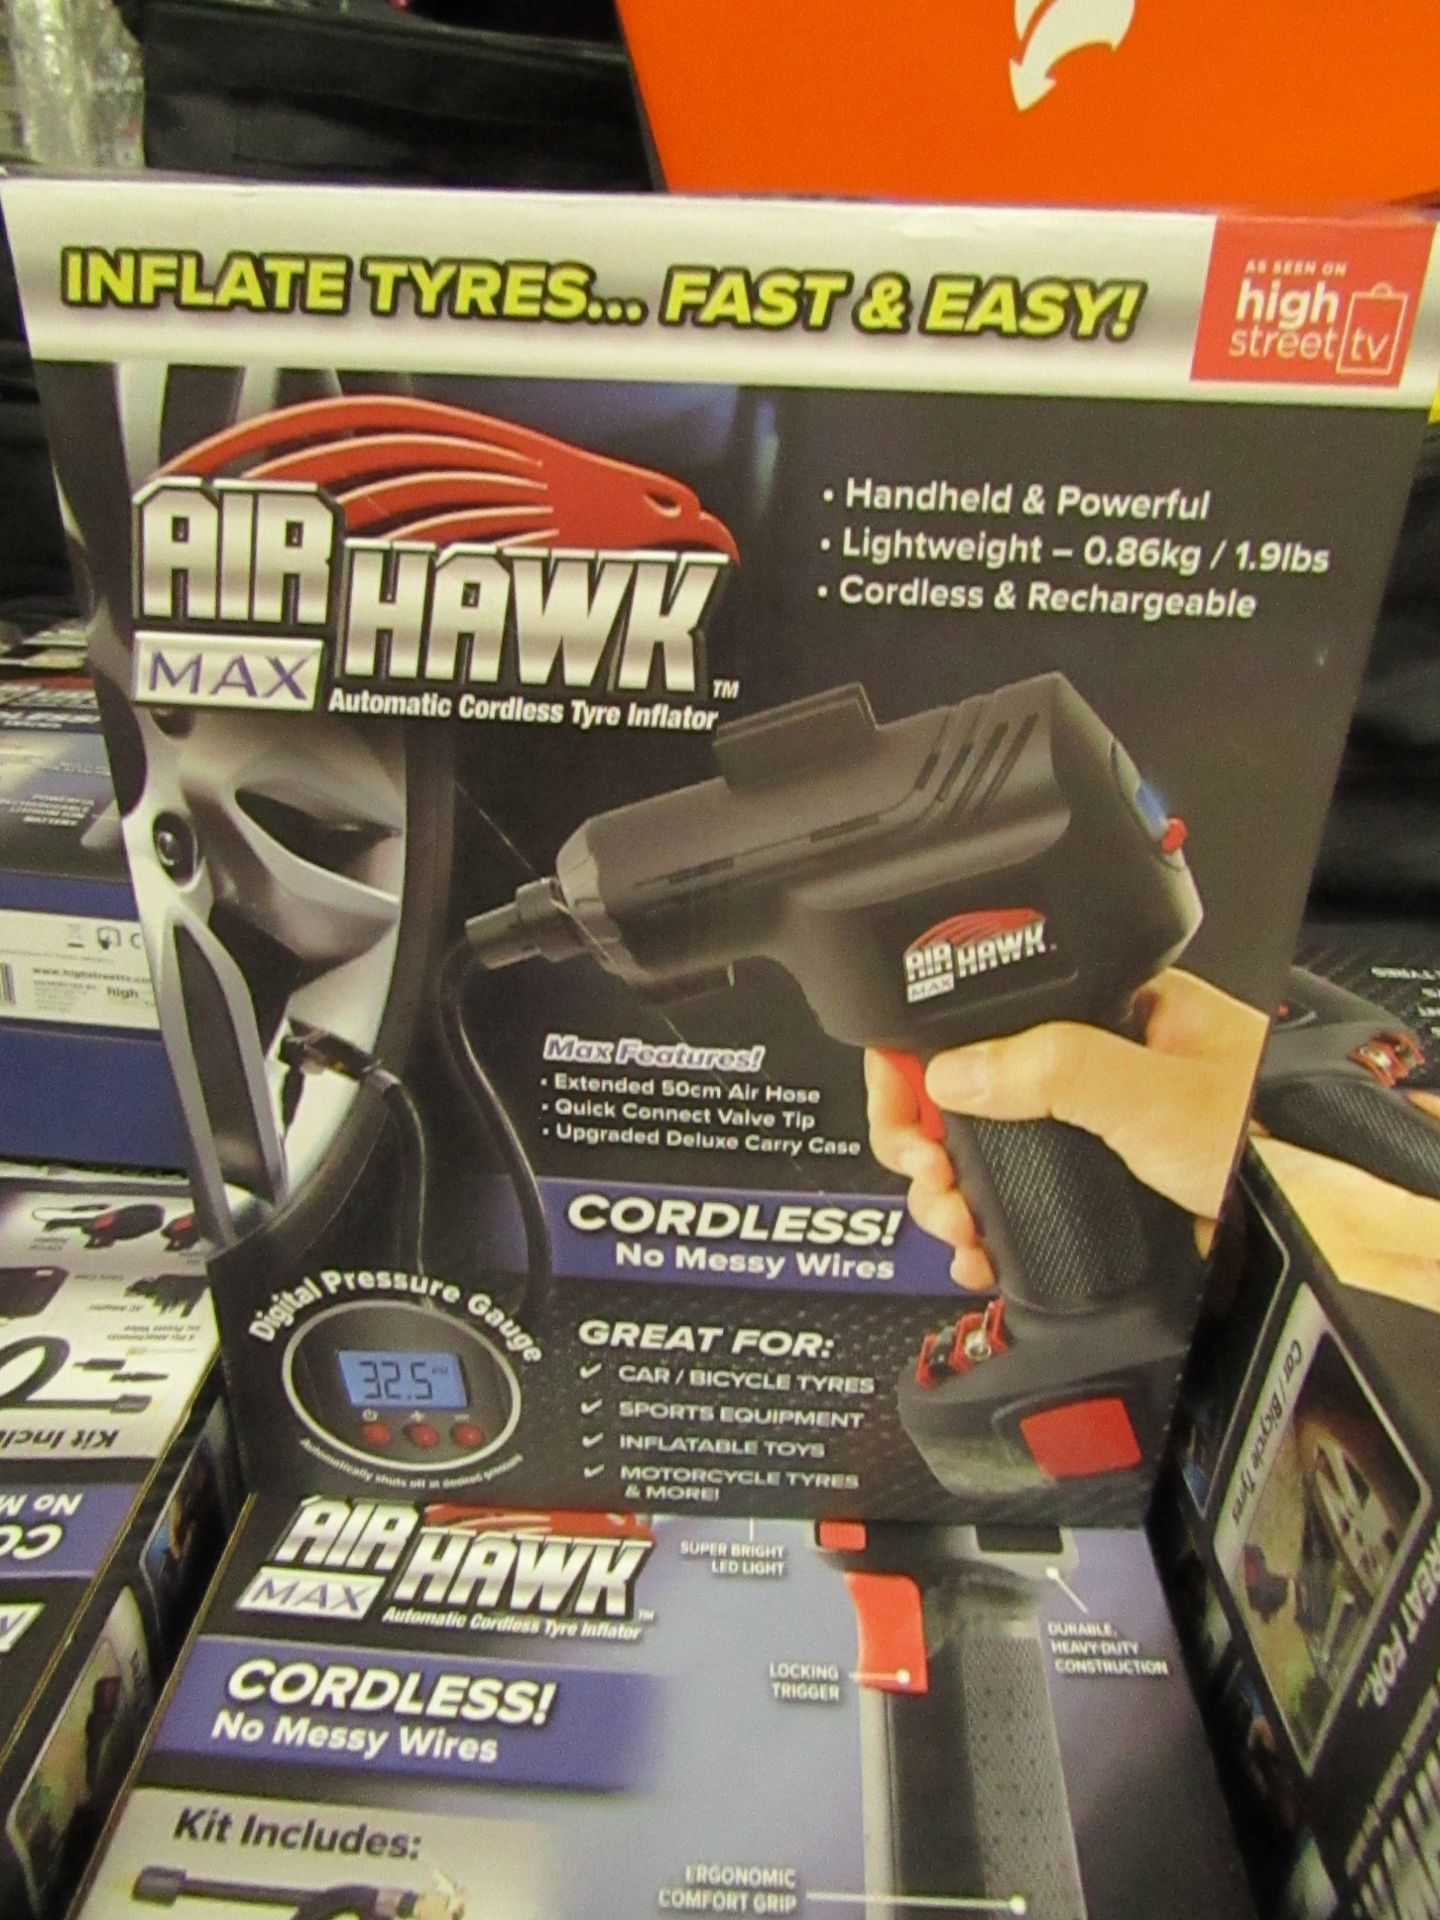 | 1x | air hawk pro | unchecked and boxed | no online re-sale | SKU C5060191466837 | RRP £49.99 |